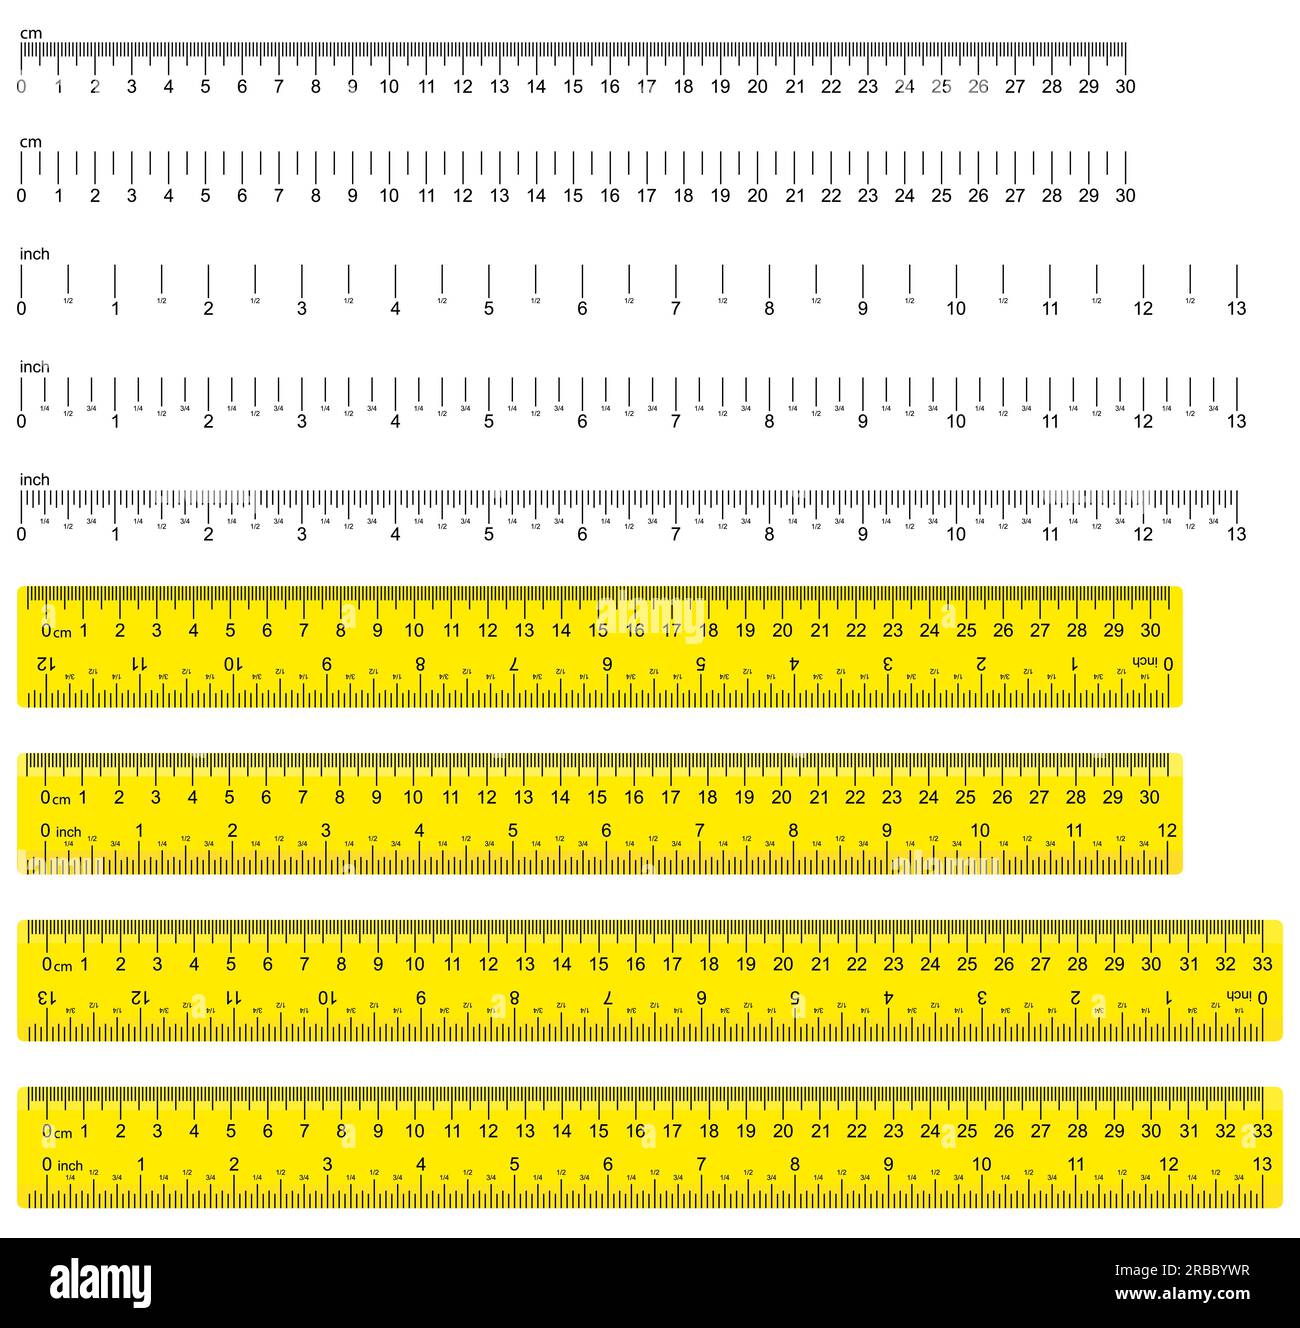 https://c8.alamy.com/comp/2RBBYWR/inch-and-metric-rulers-in-yellow-on-a-white-background-centimeters-and-inches-measuring-the-metric-of-the-scale-see-icons-of-precision-centimeter-me-2RBBYWR.jpg